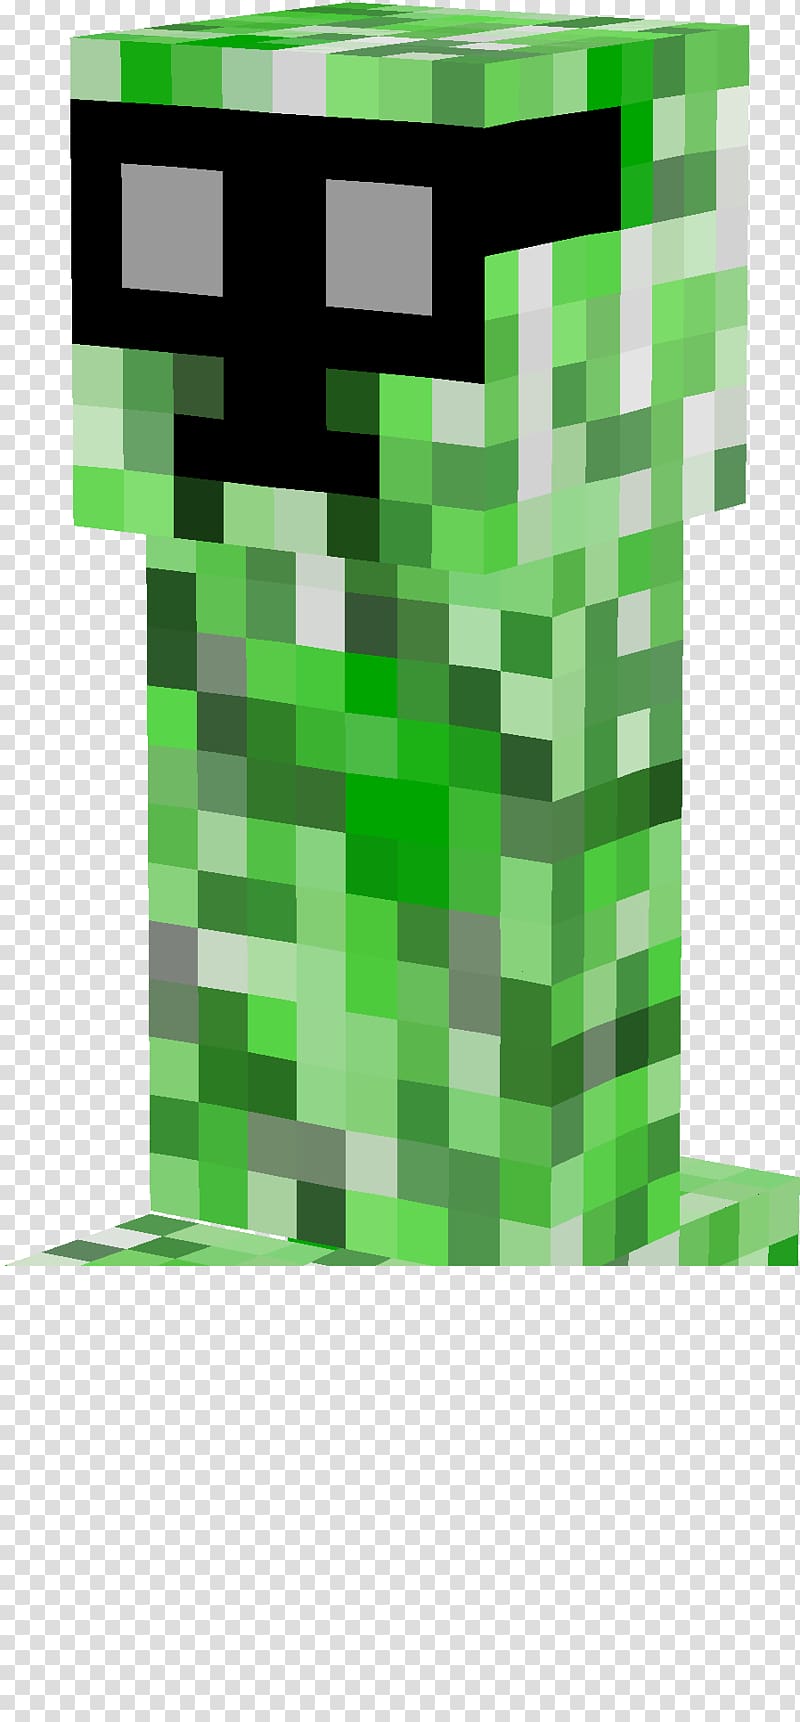 Minecraft: Pocket Edition Creeper Mob Video Game PNG - Free Download